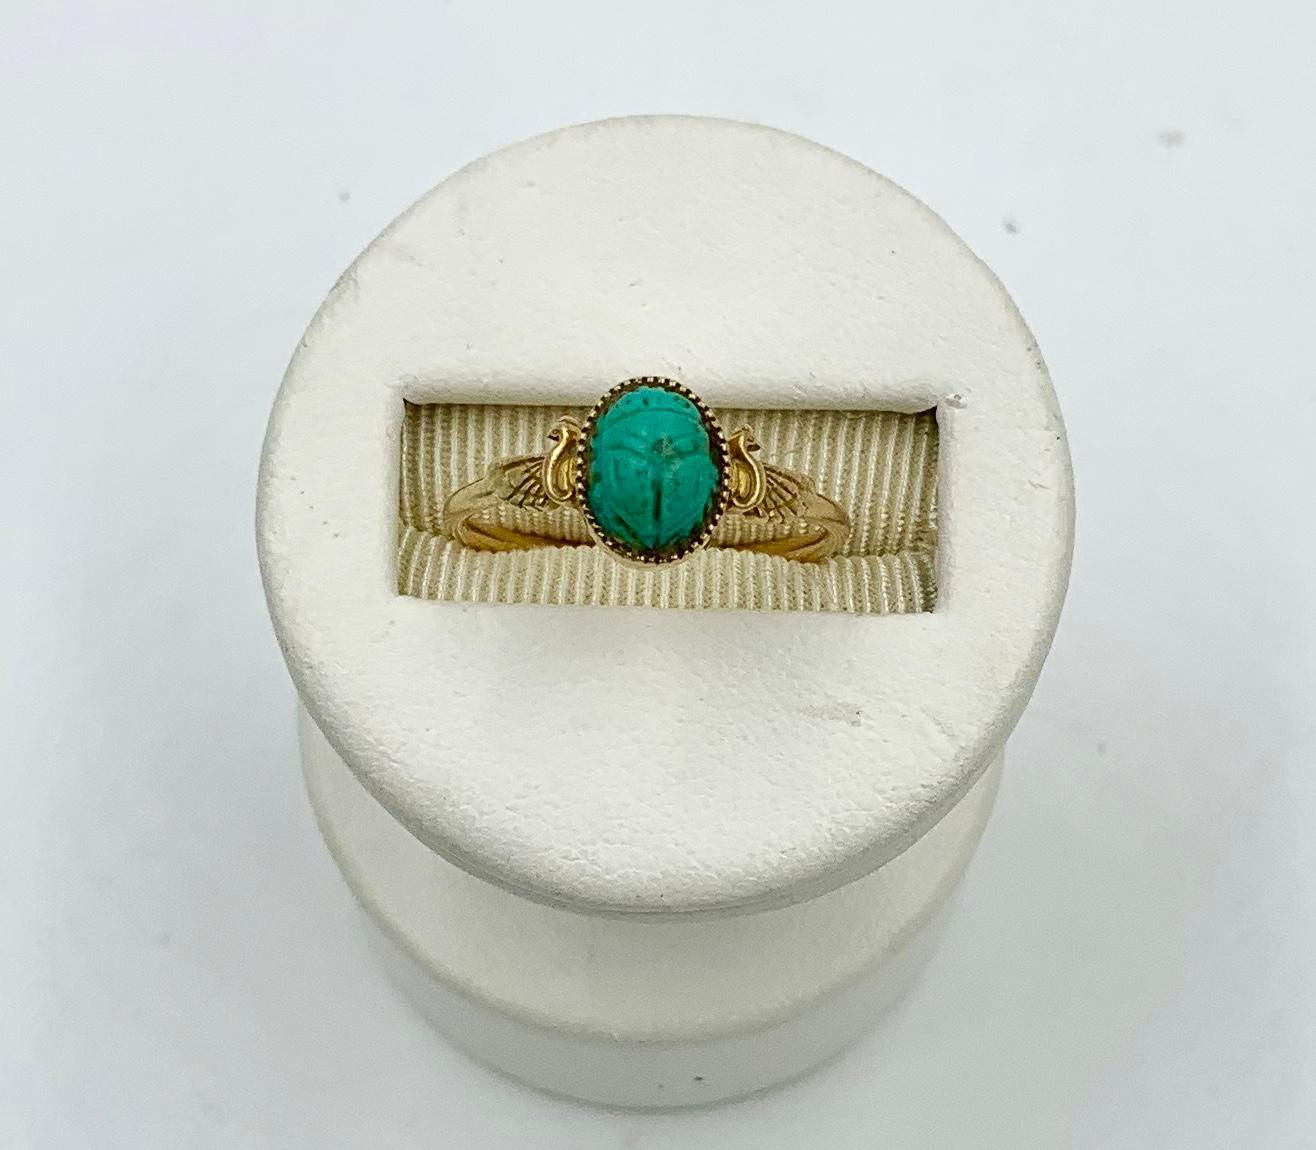 A museum quality antique Egyptian Revival Scarab Phoenix masterpiece.  The ring has a central Scarab carved in Turquoise of great beauty.  The Scarab is set in a 14 Karat Gold beaded collet.  On either side of the Scarab are stunning renditions of a